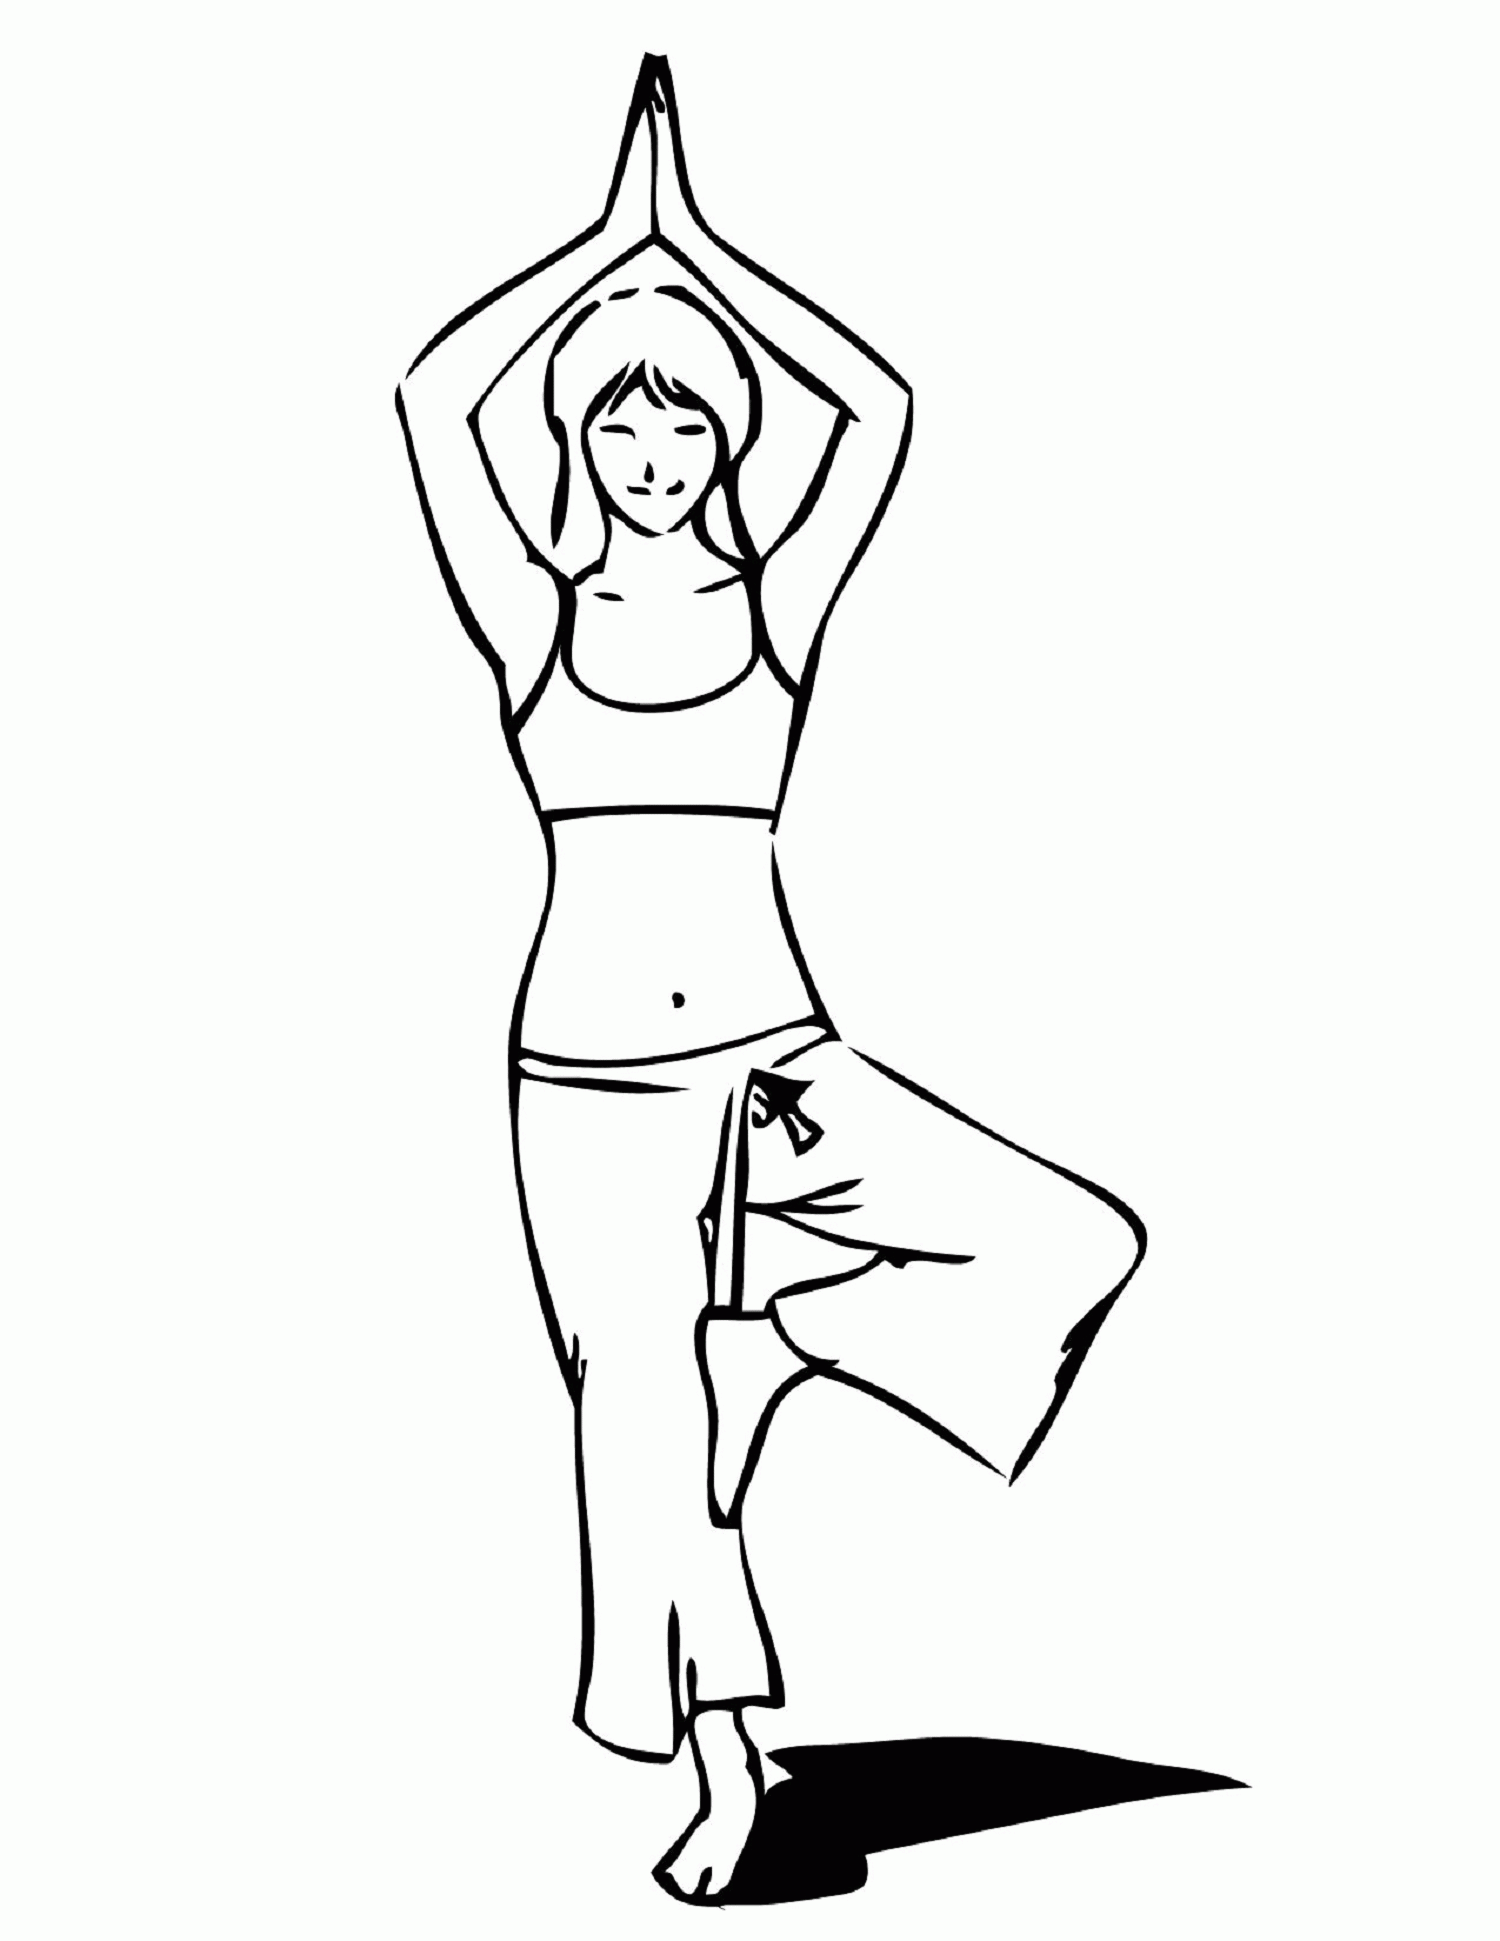 yoga-coloring-page-0019-q1